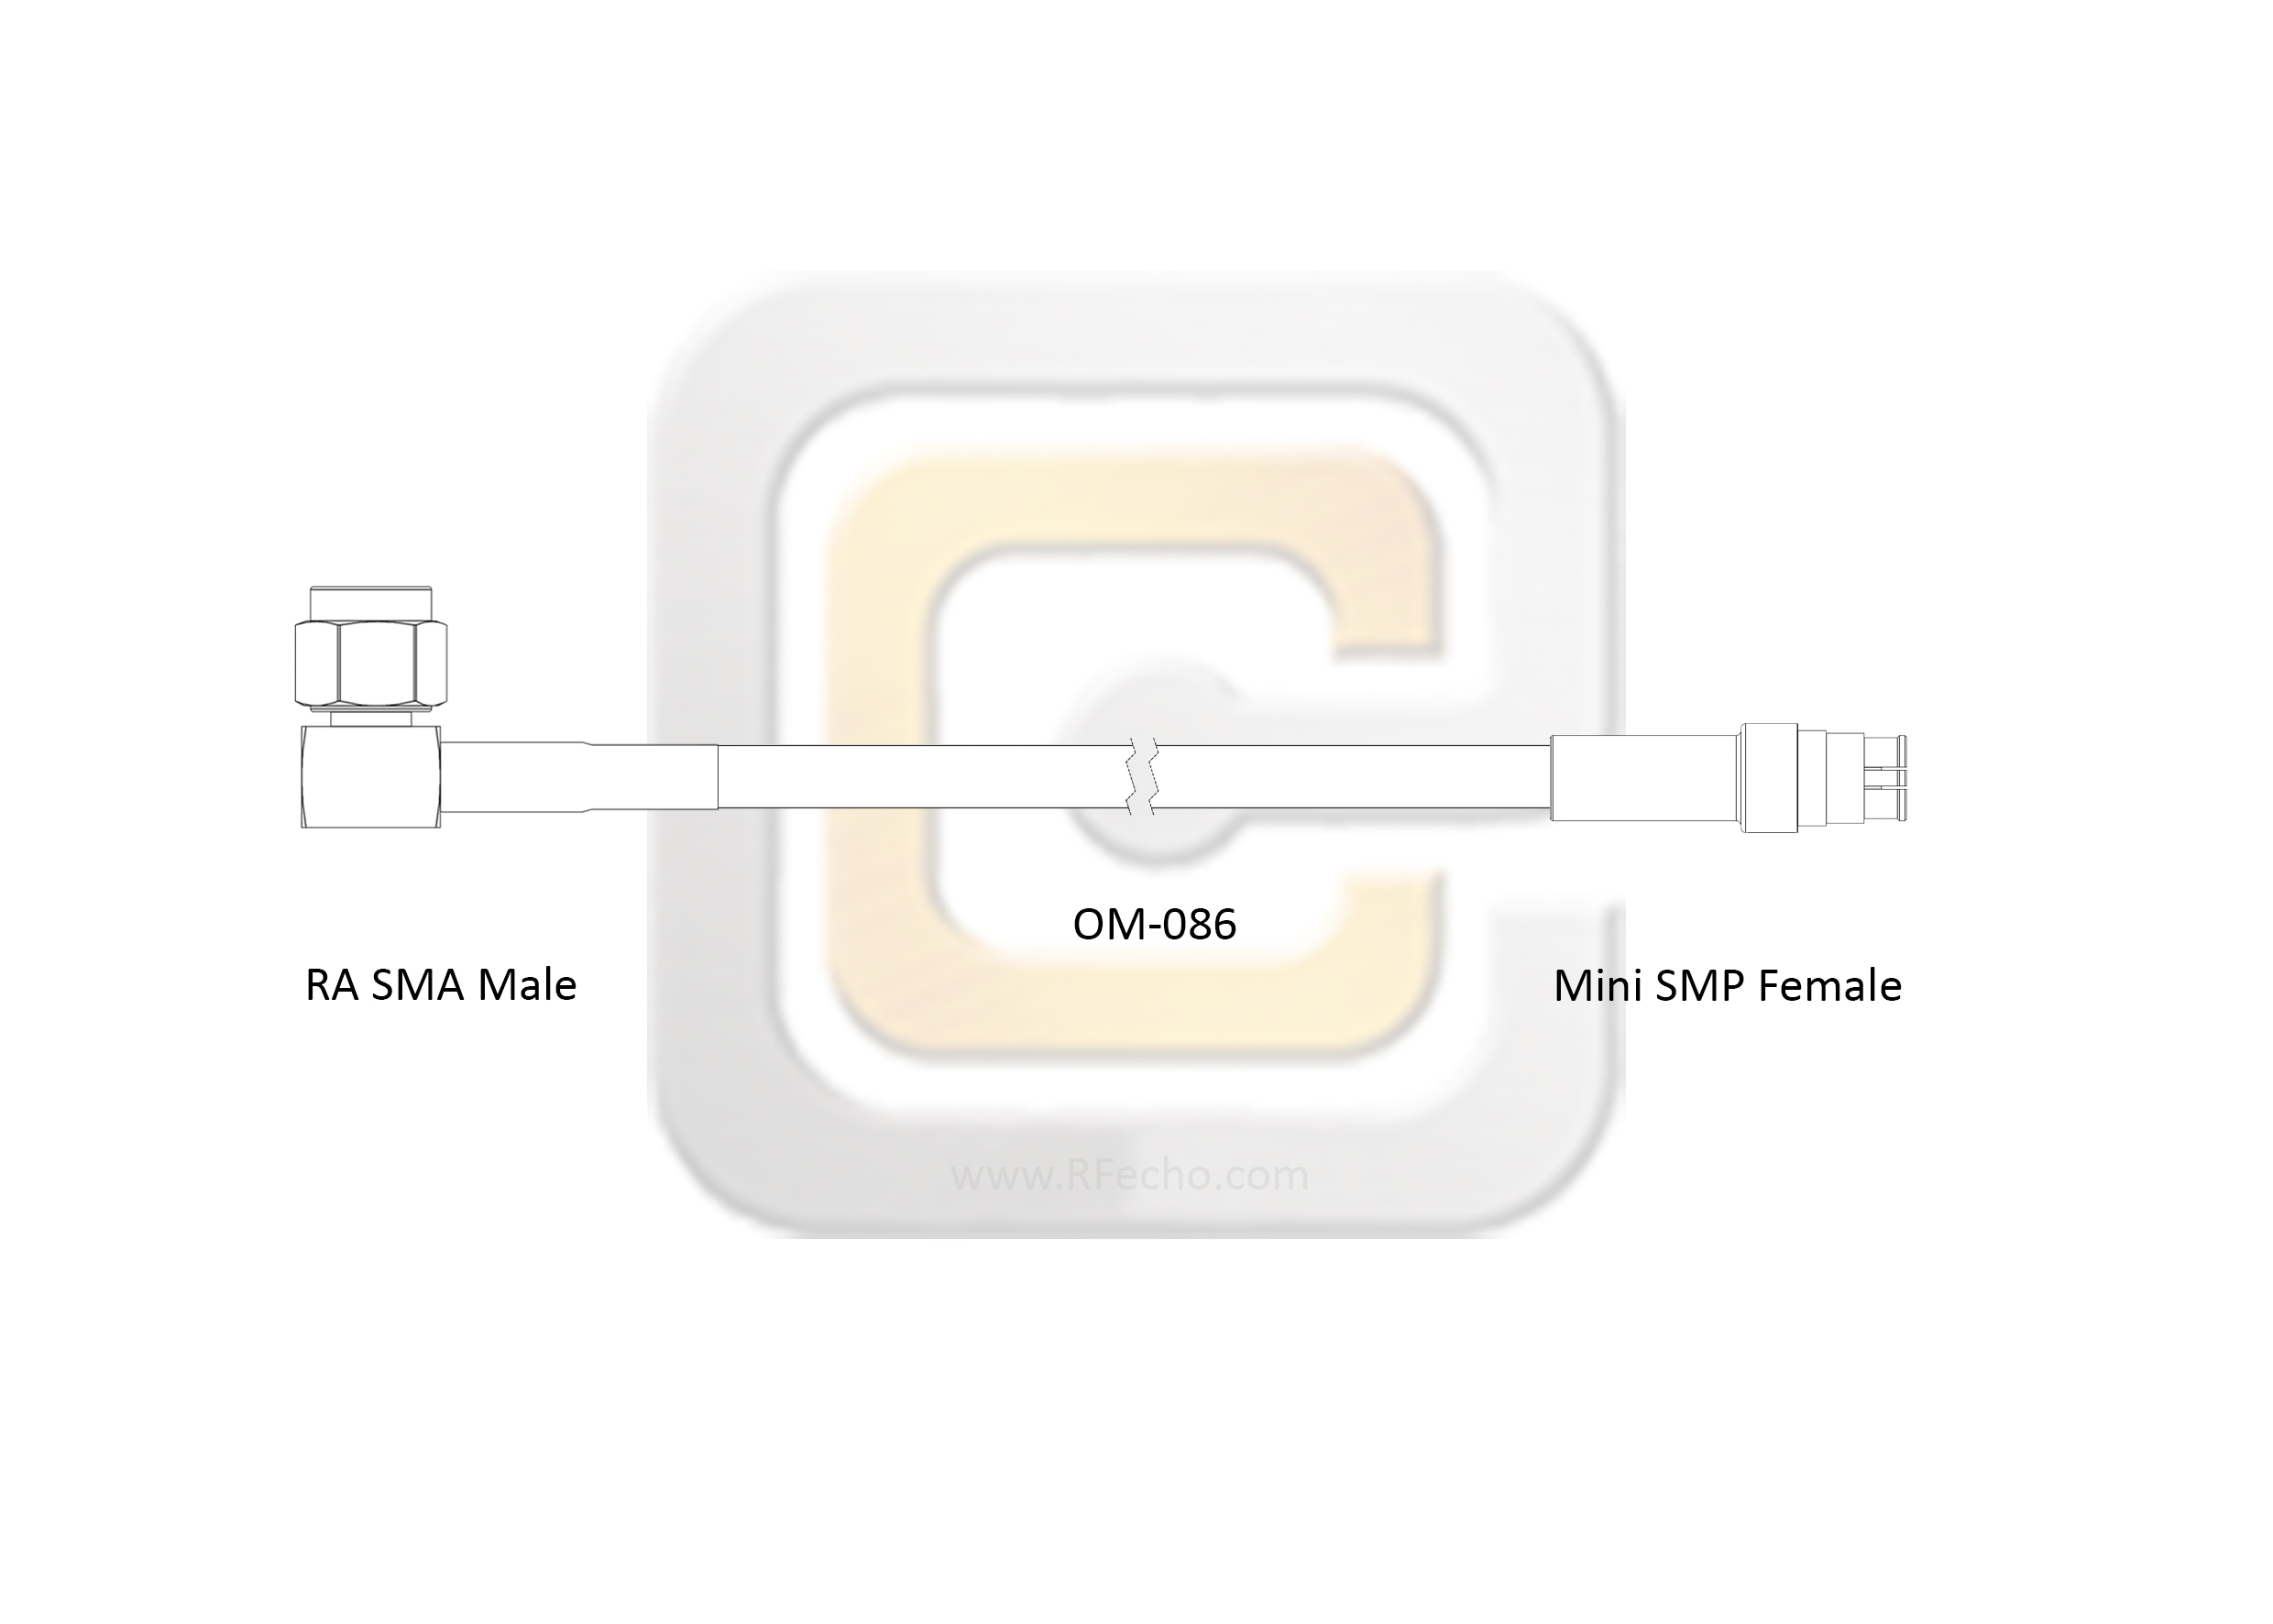 Right Angle SMA Male to Mini SMP Female, 26.5 GHz, CompositeOM-086 Coax and RoHS